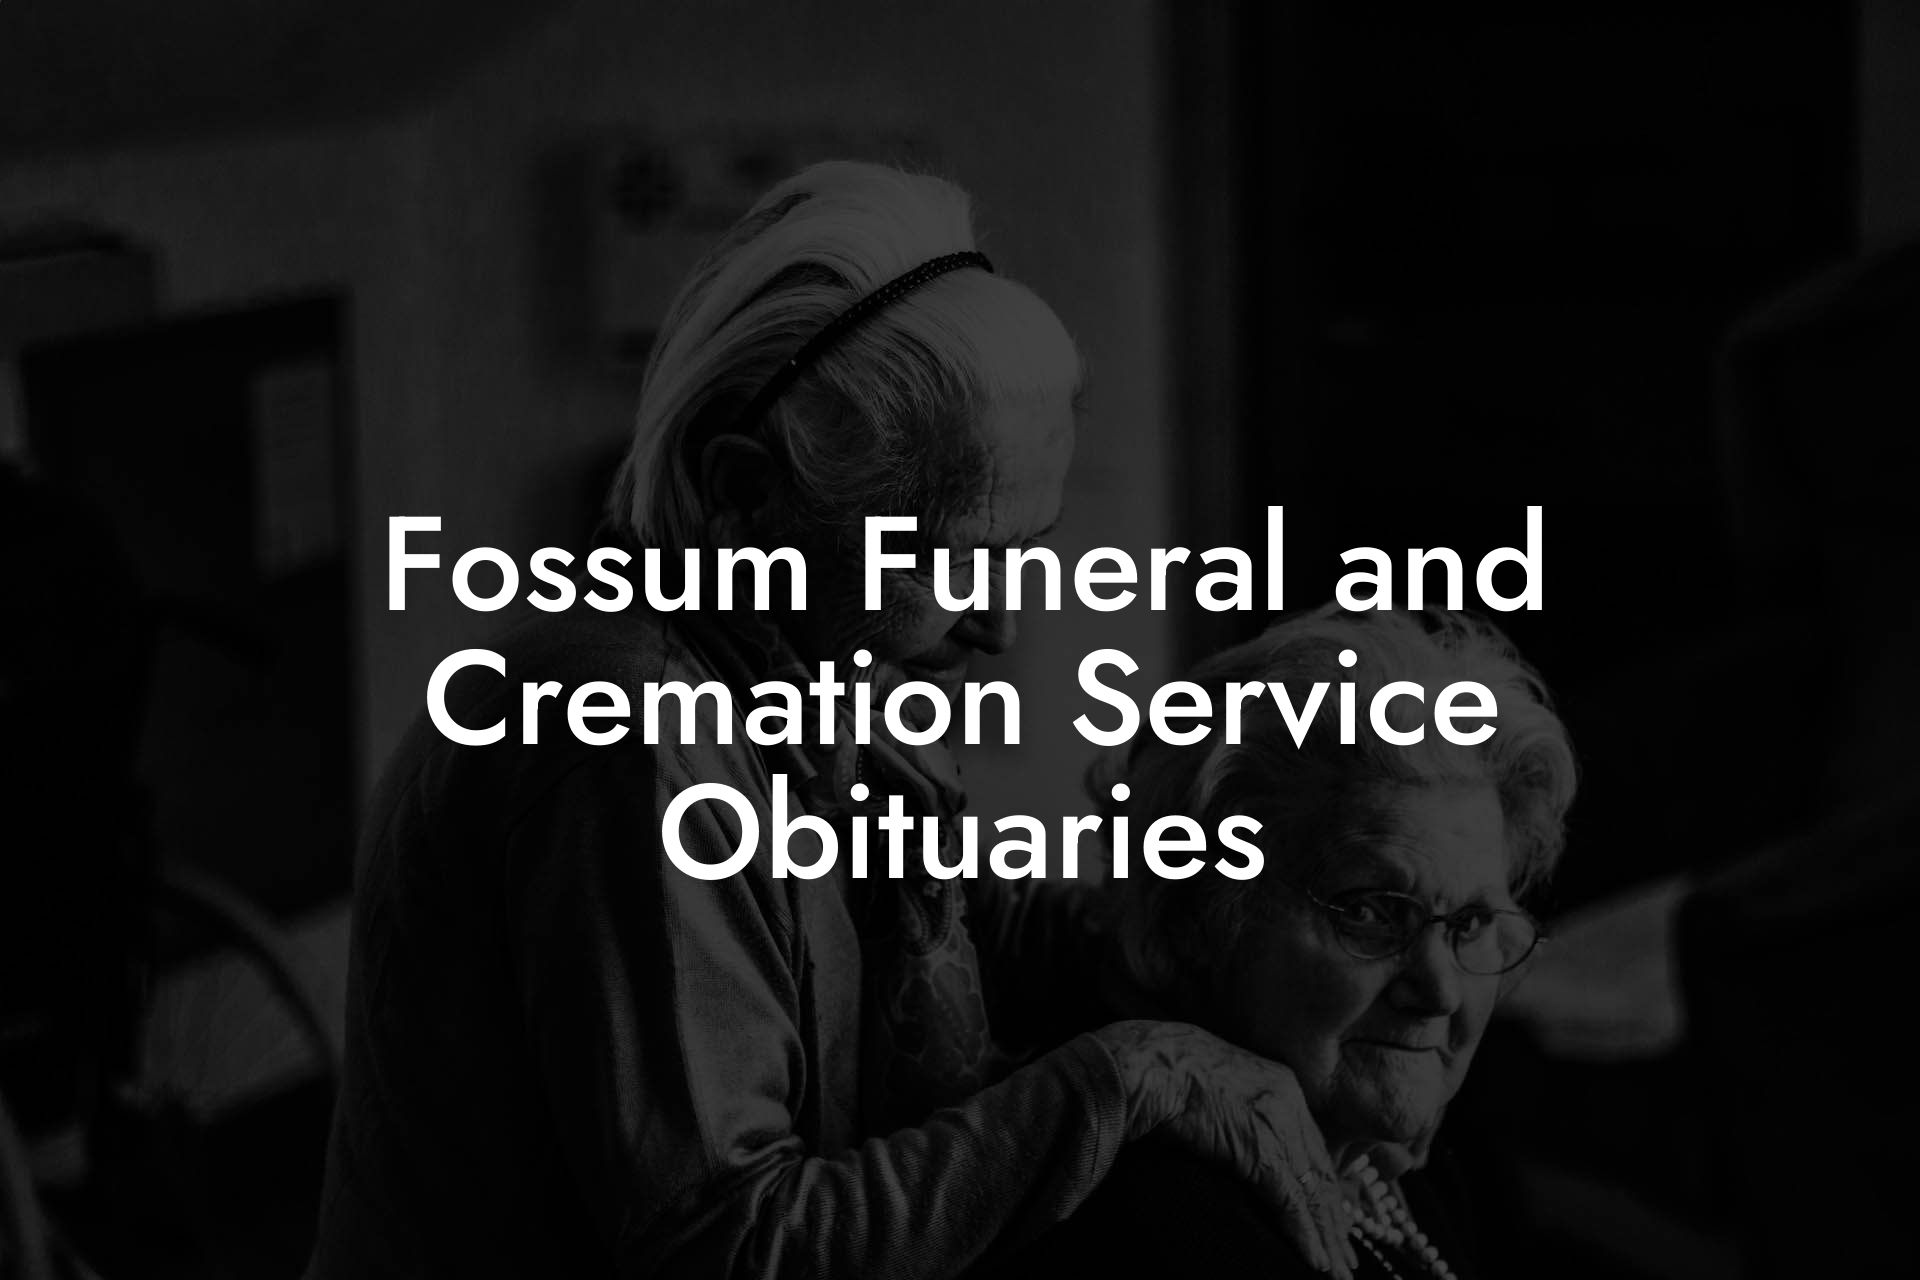 Fossum Funeral and Cremation Service Obituaries